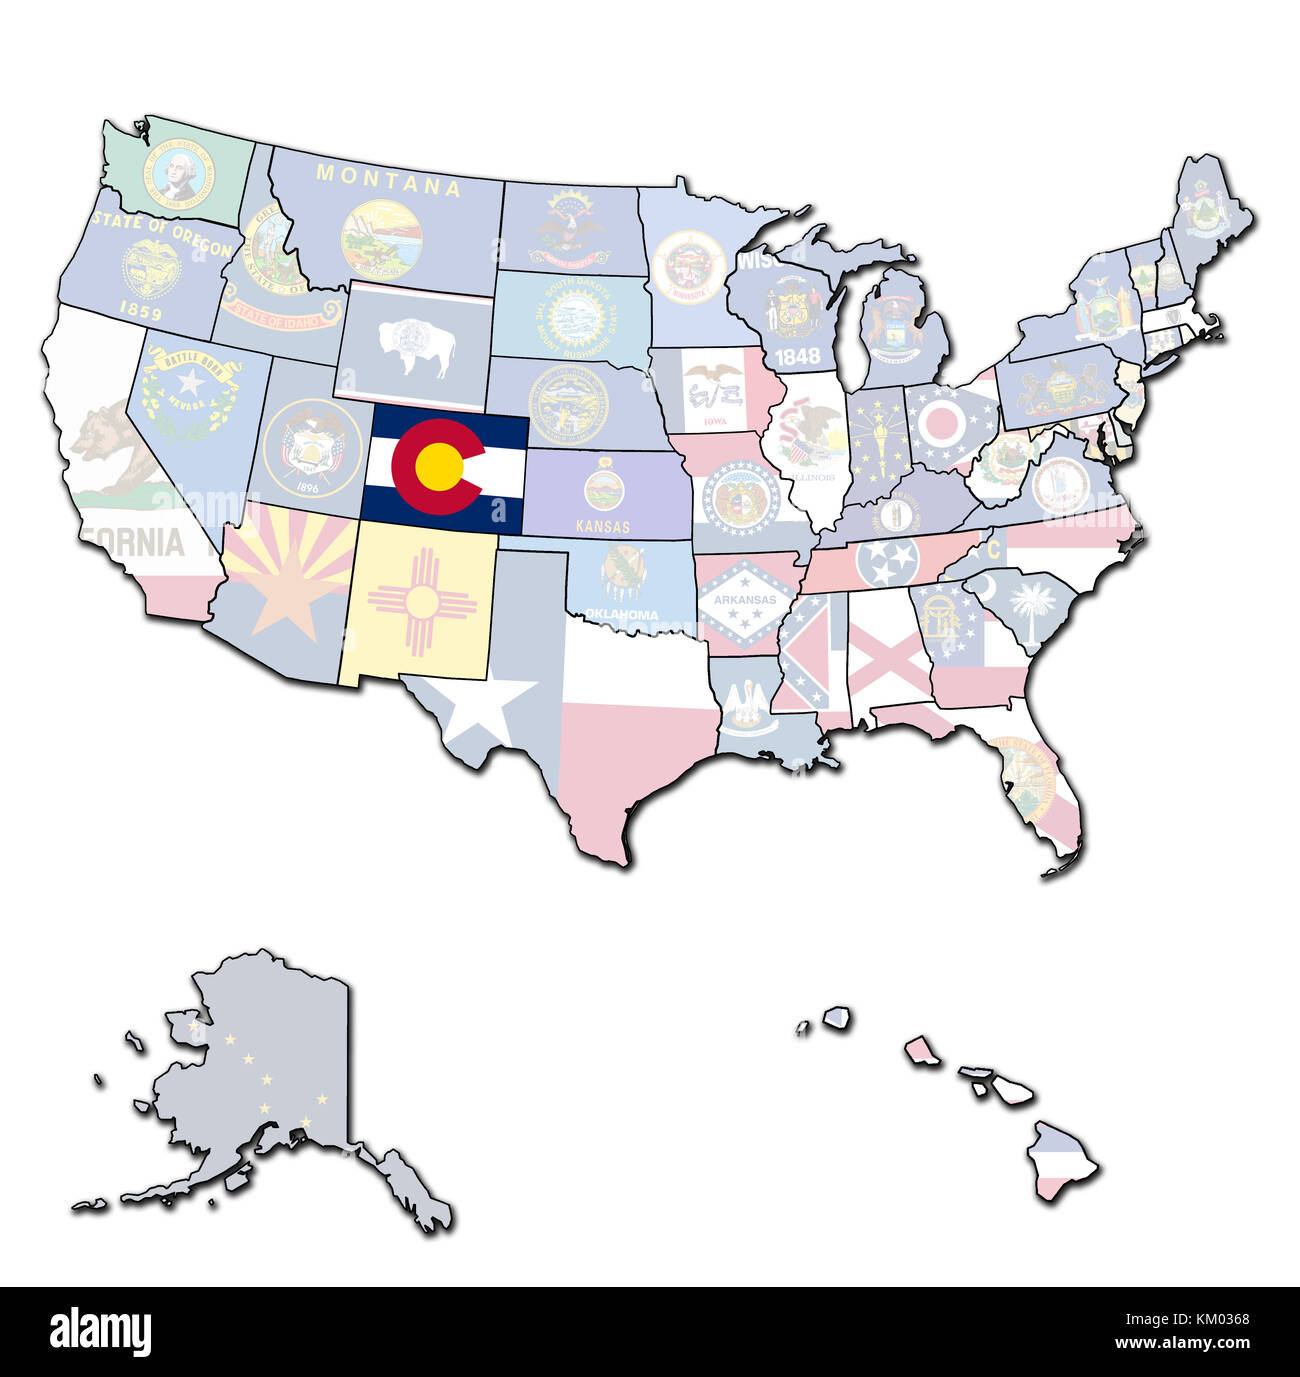 Colorado On Isolated Map Of United States Of America With State